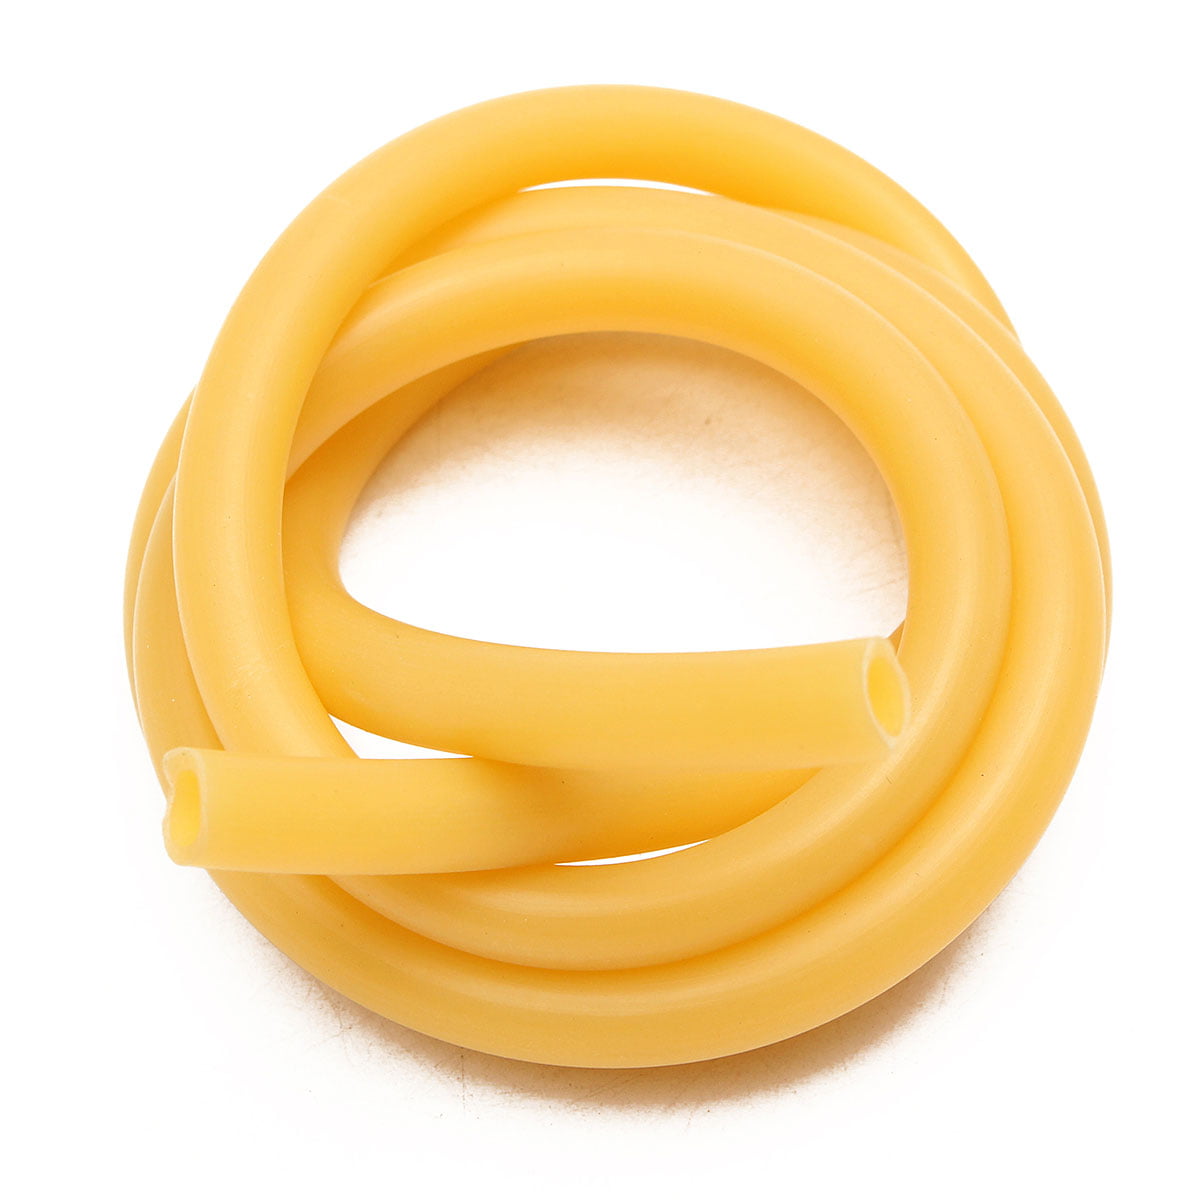 OD 9mm,ID 6mm,Price for 1 meter Rubber hose,Amber latex tube,bleed tube 